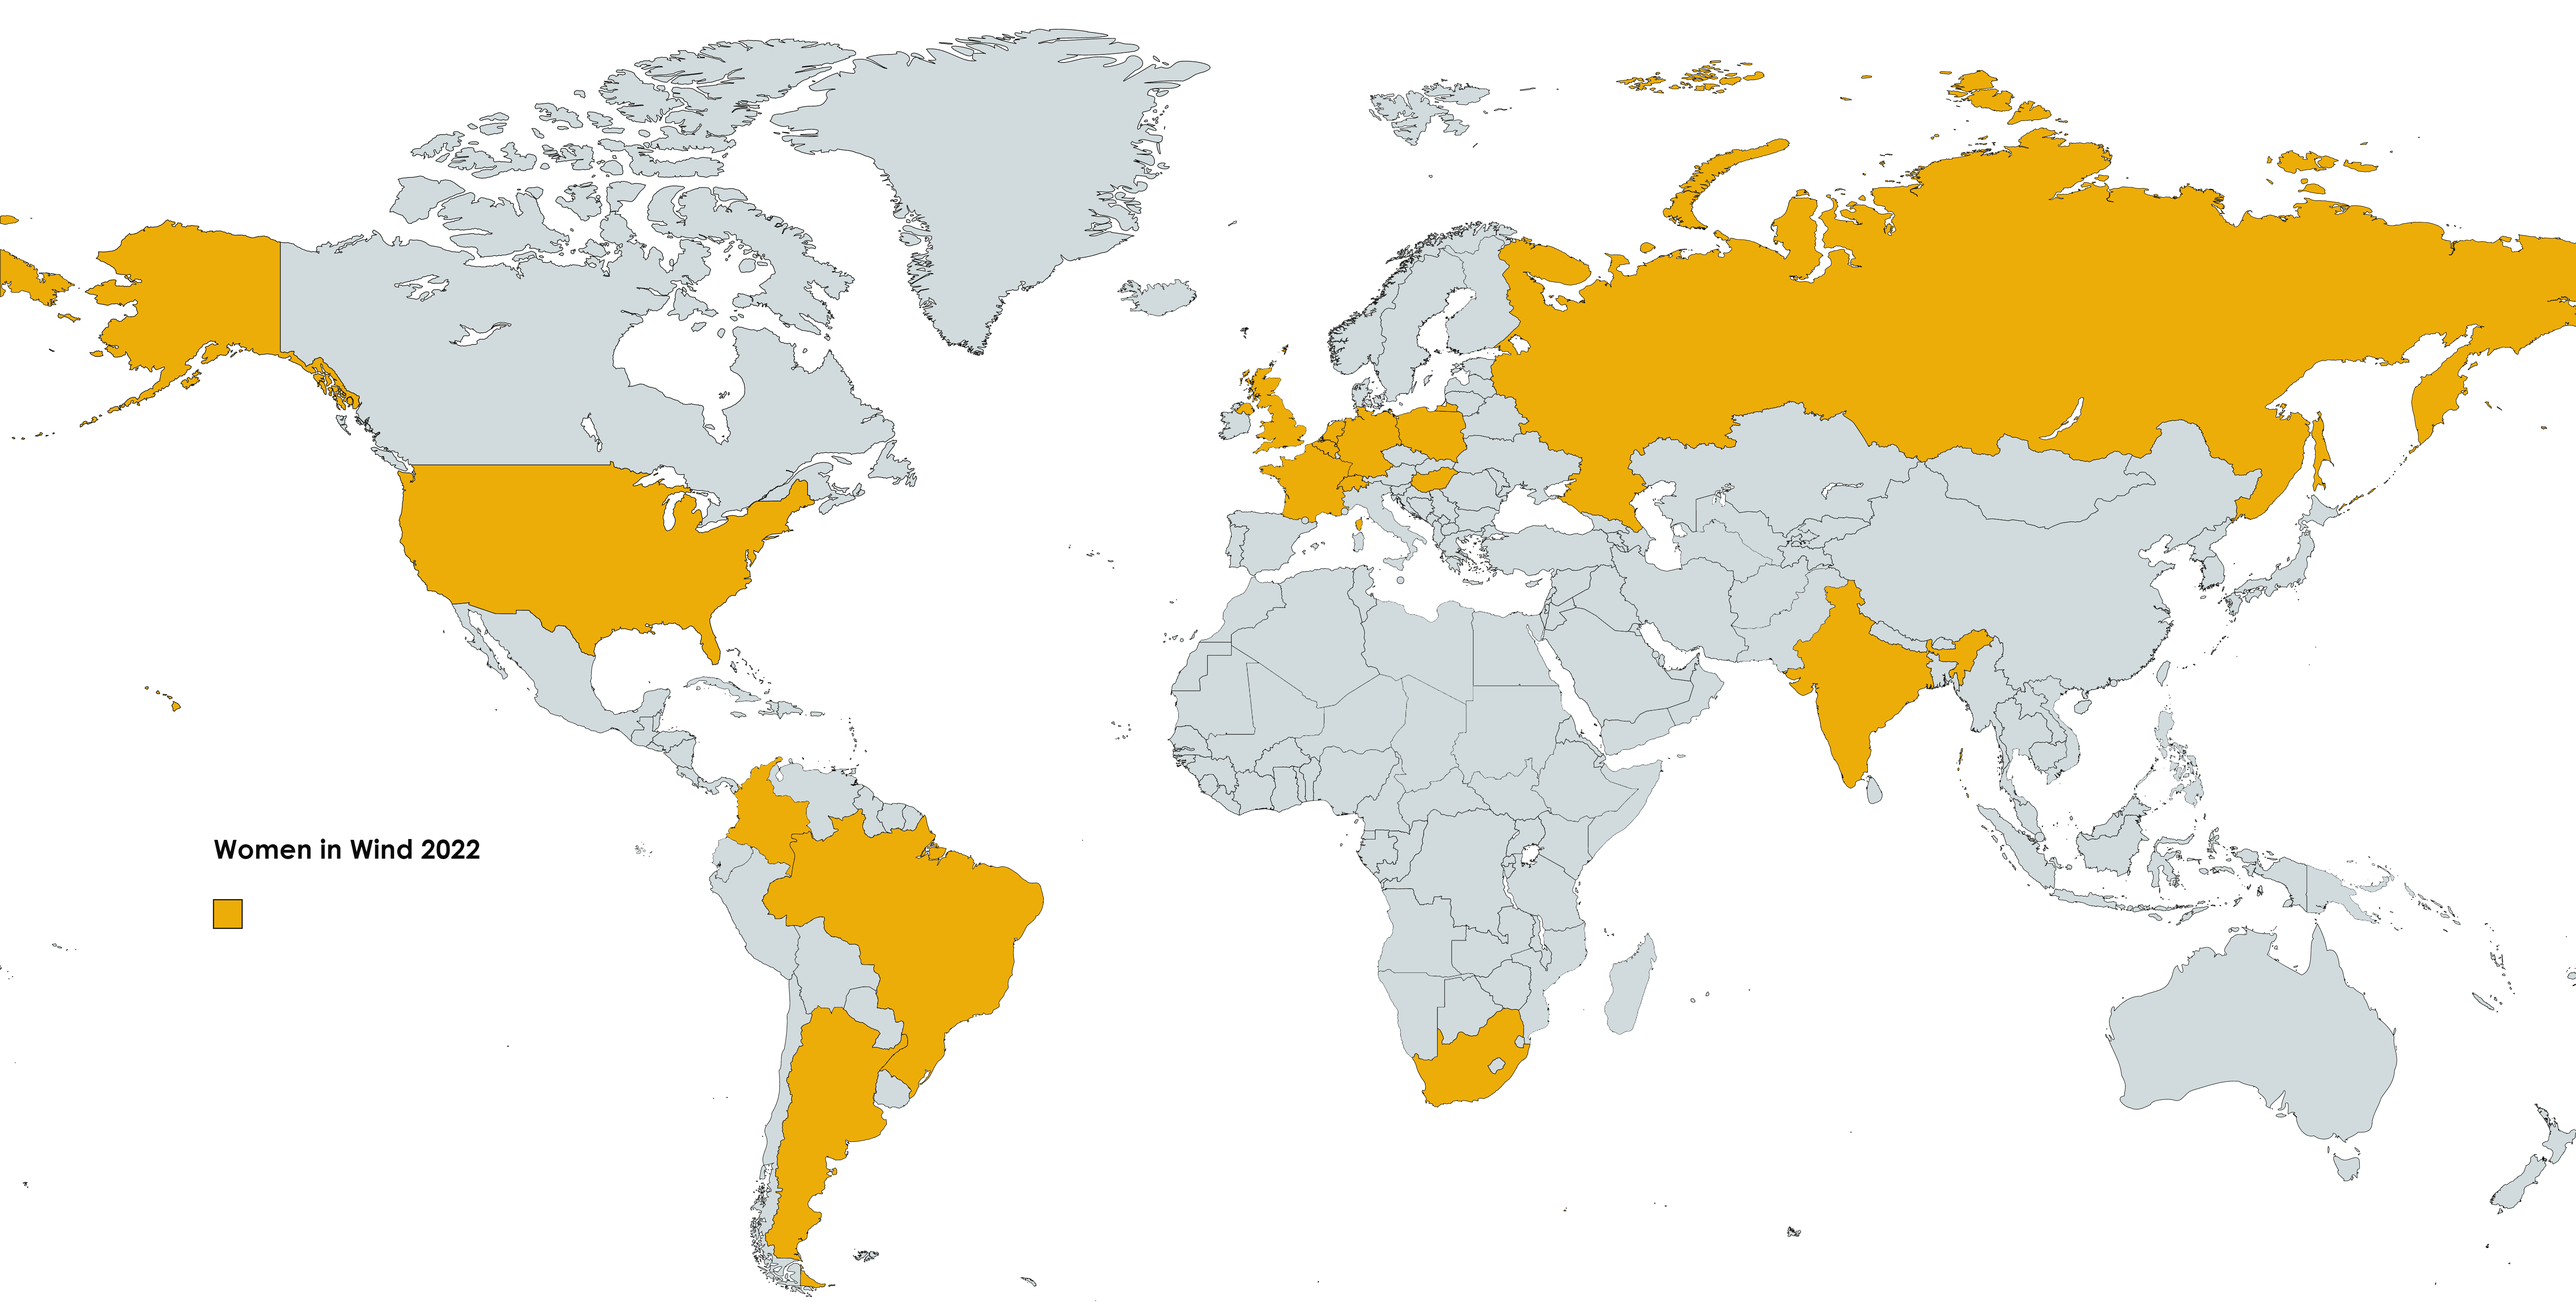 Map of the world, with mentor countries highlighted